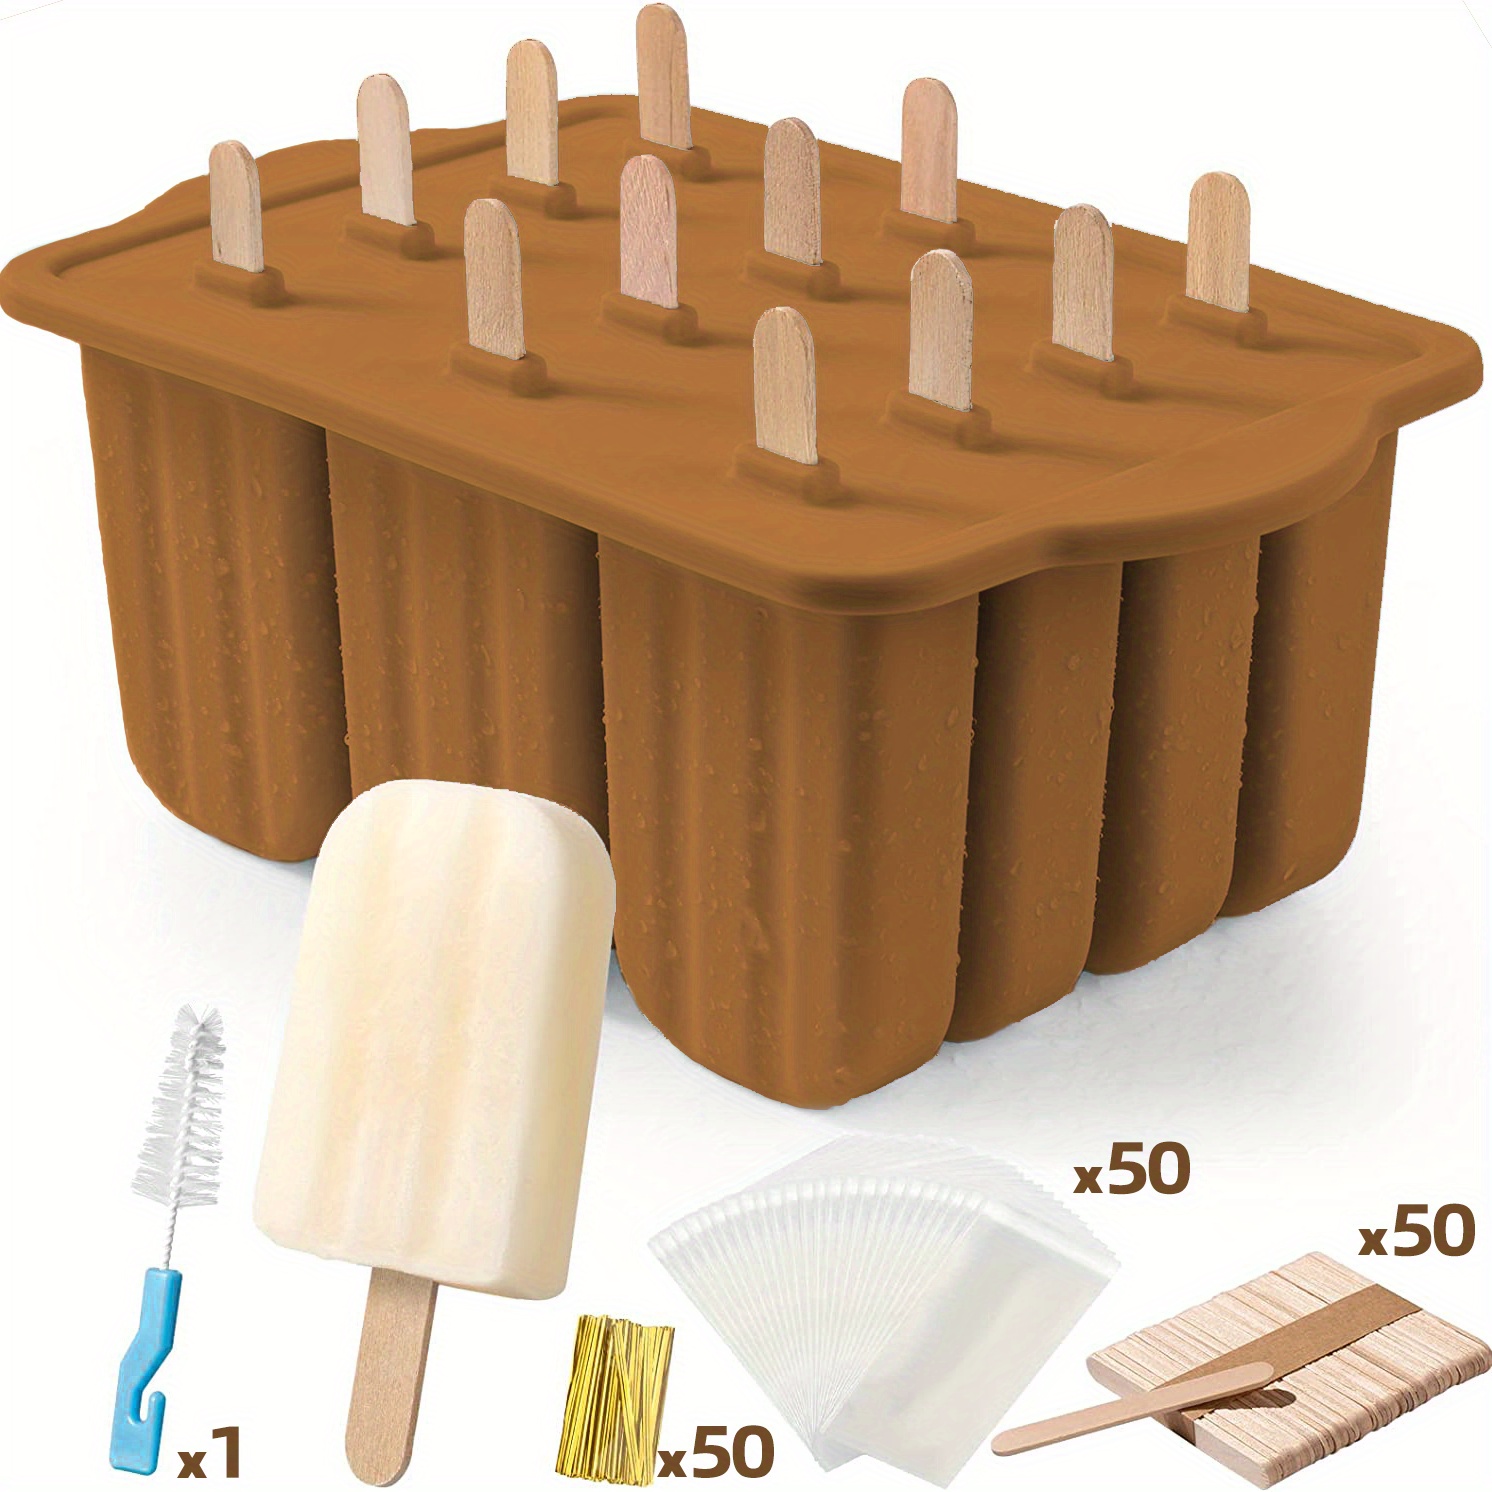  Homemade Popsicle Molds Shapes, Silicone Frozen Ice Popsicle  Maker-BPA Free, with 50 Sticks, 50 Bags, 10 Reusable Sticks, Funnel and Ice  Pop Recipes: Home & Kitchen